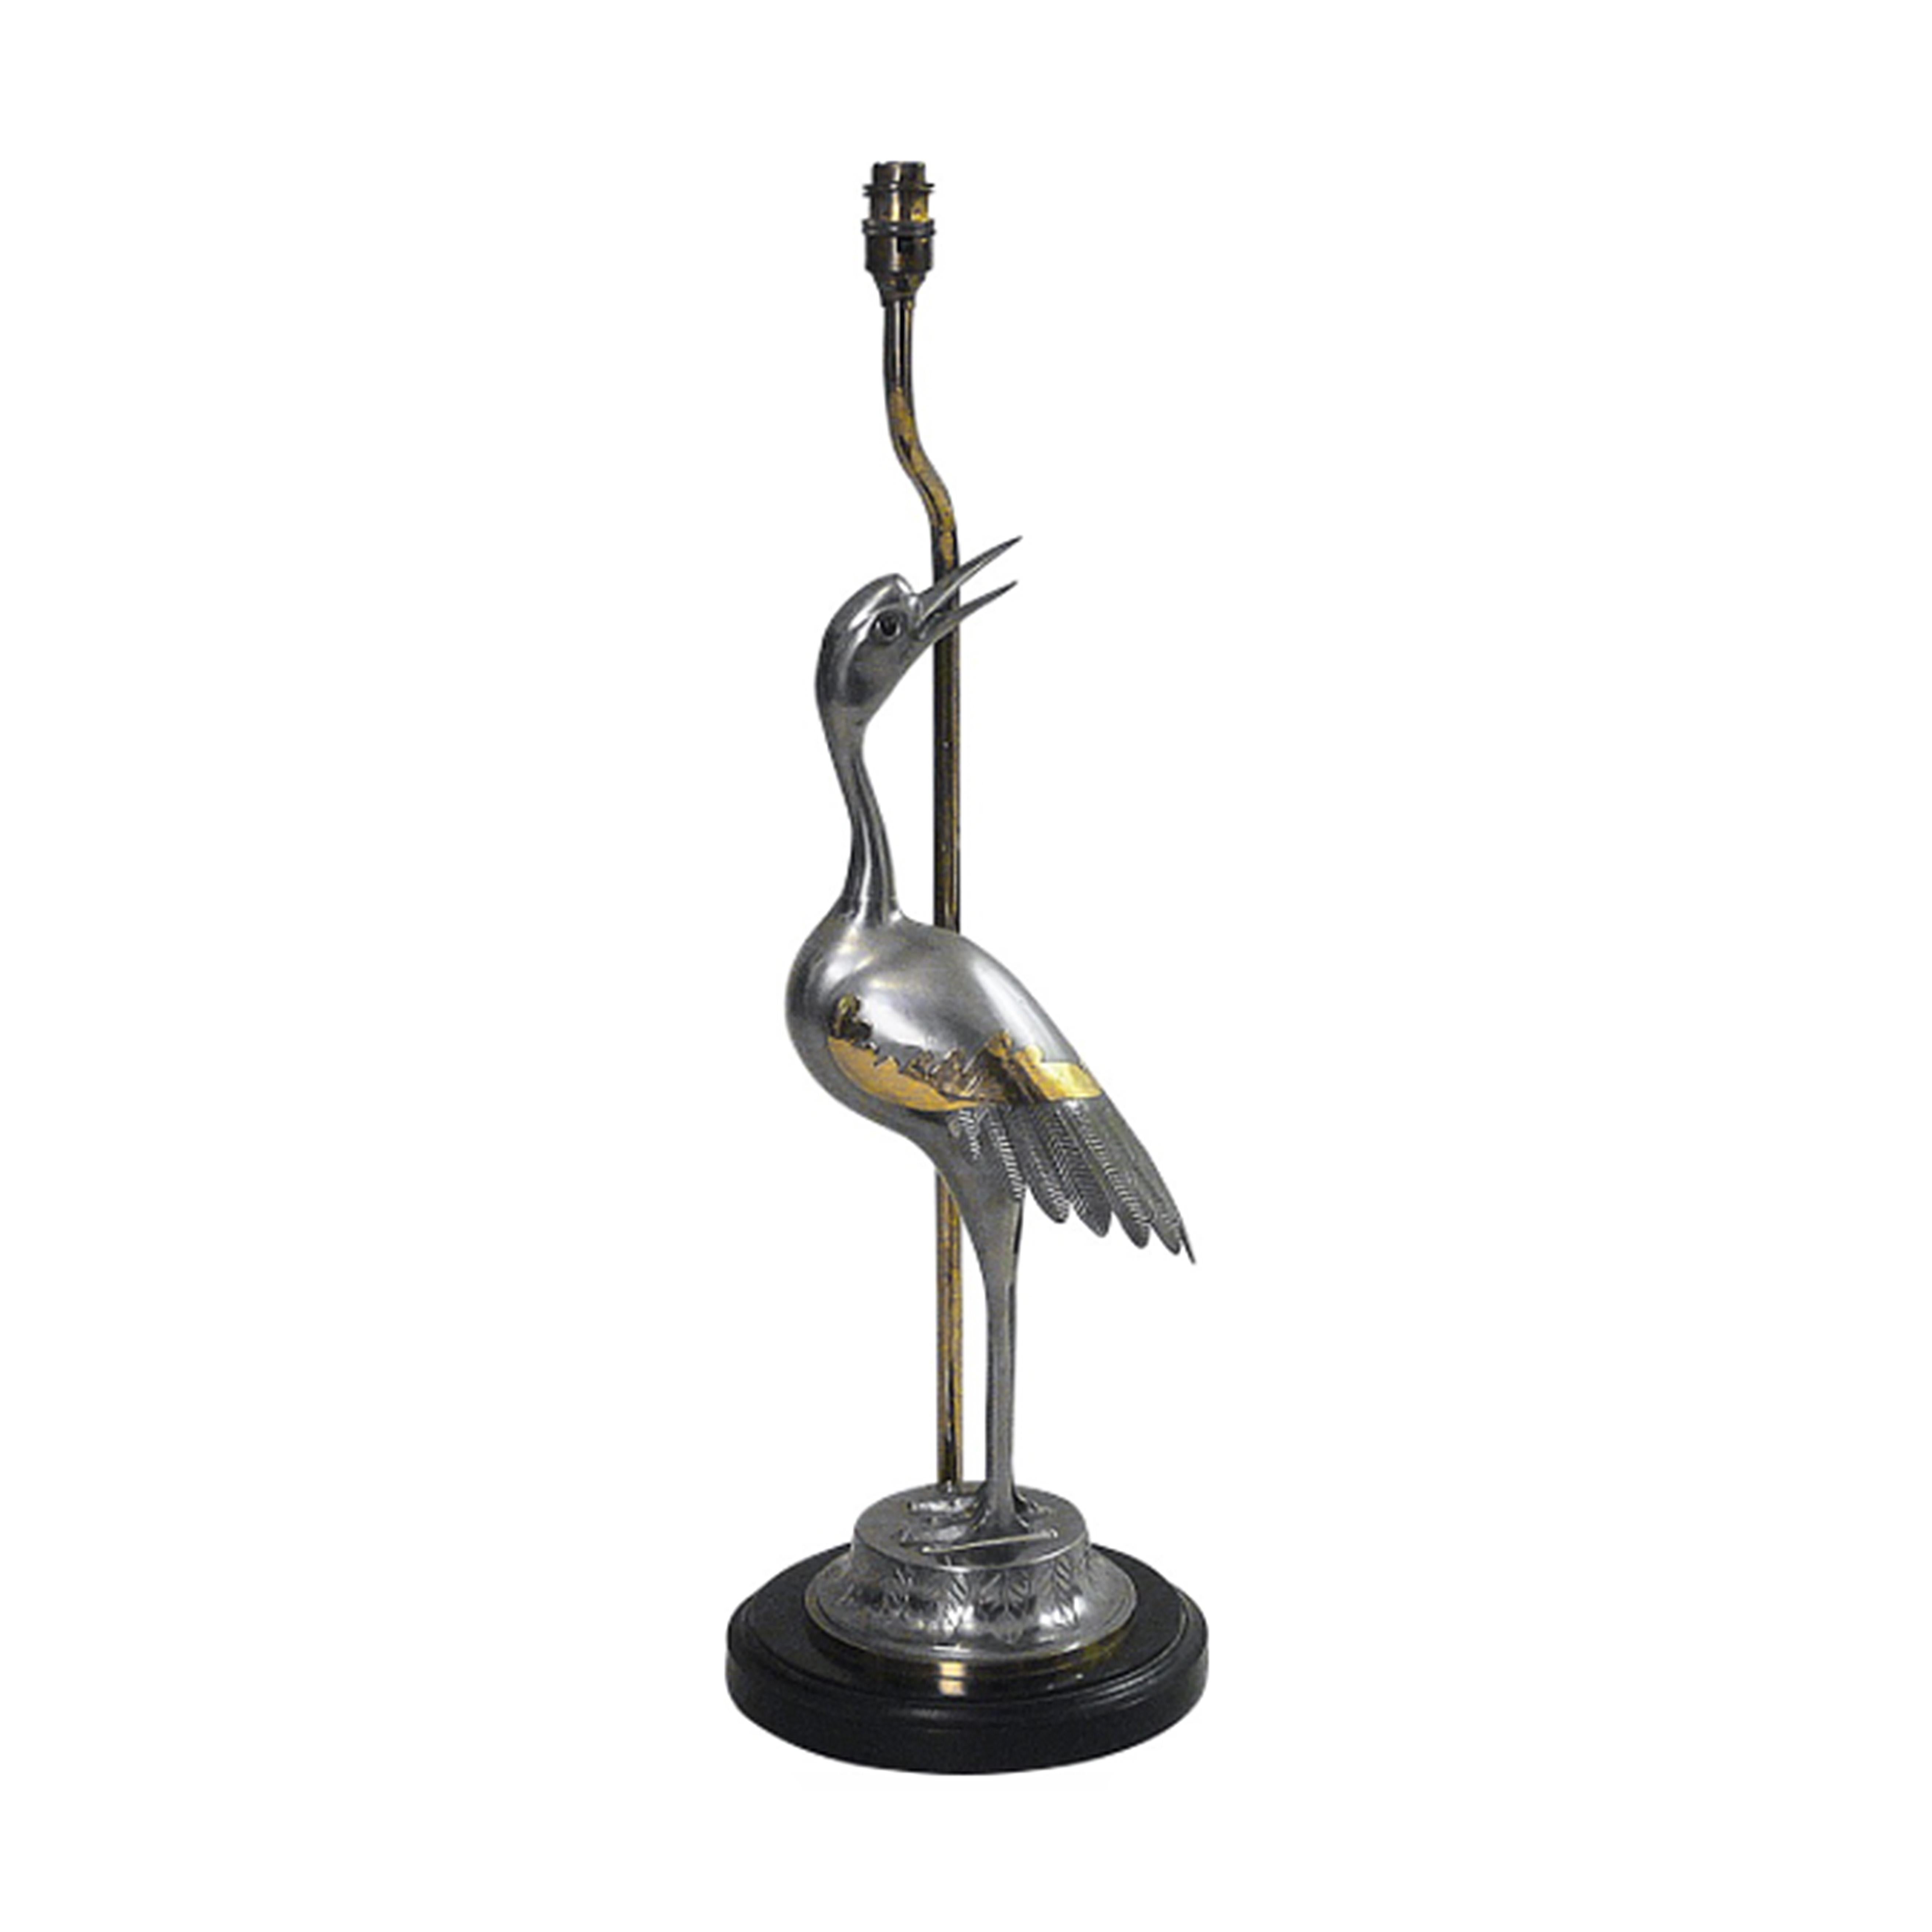 Elegant heron table lamp with beautiful details, standing on a chrome and wood base. Shade is for display purposes only and is not included with the lamp.

Please contact us for international quotes.

CREATOR: Unknown 

PLACE OF ORIGIN: UK

DATE OF